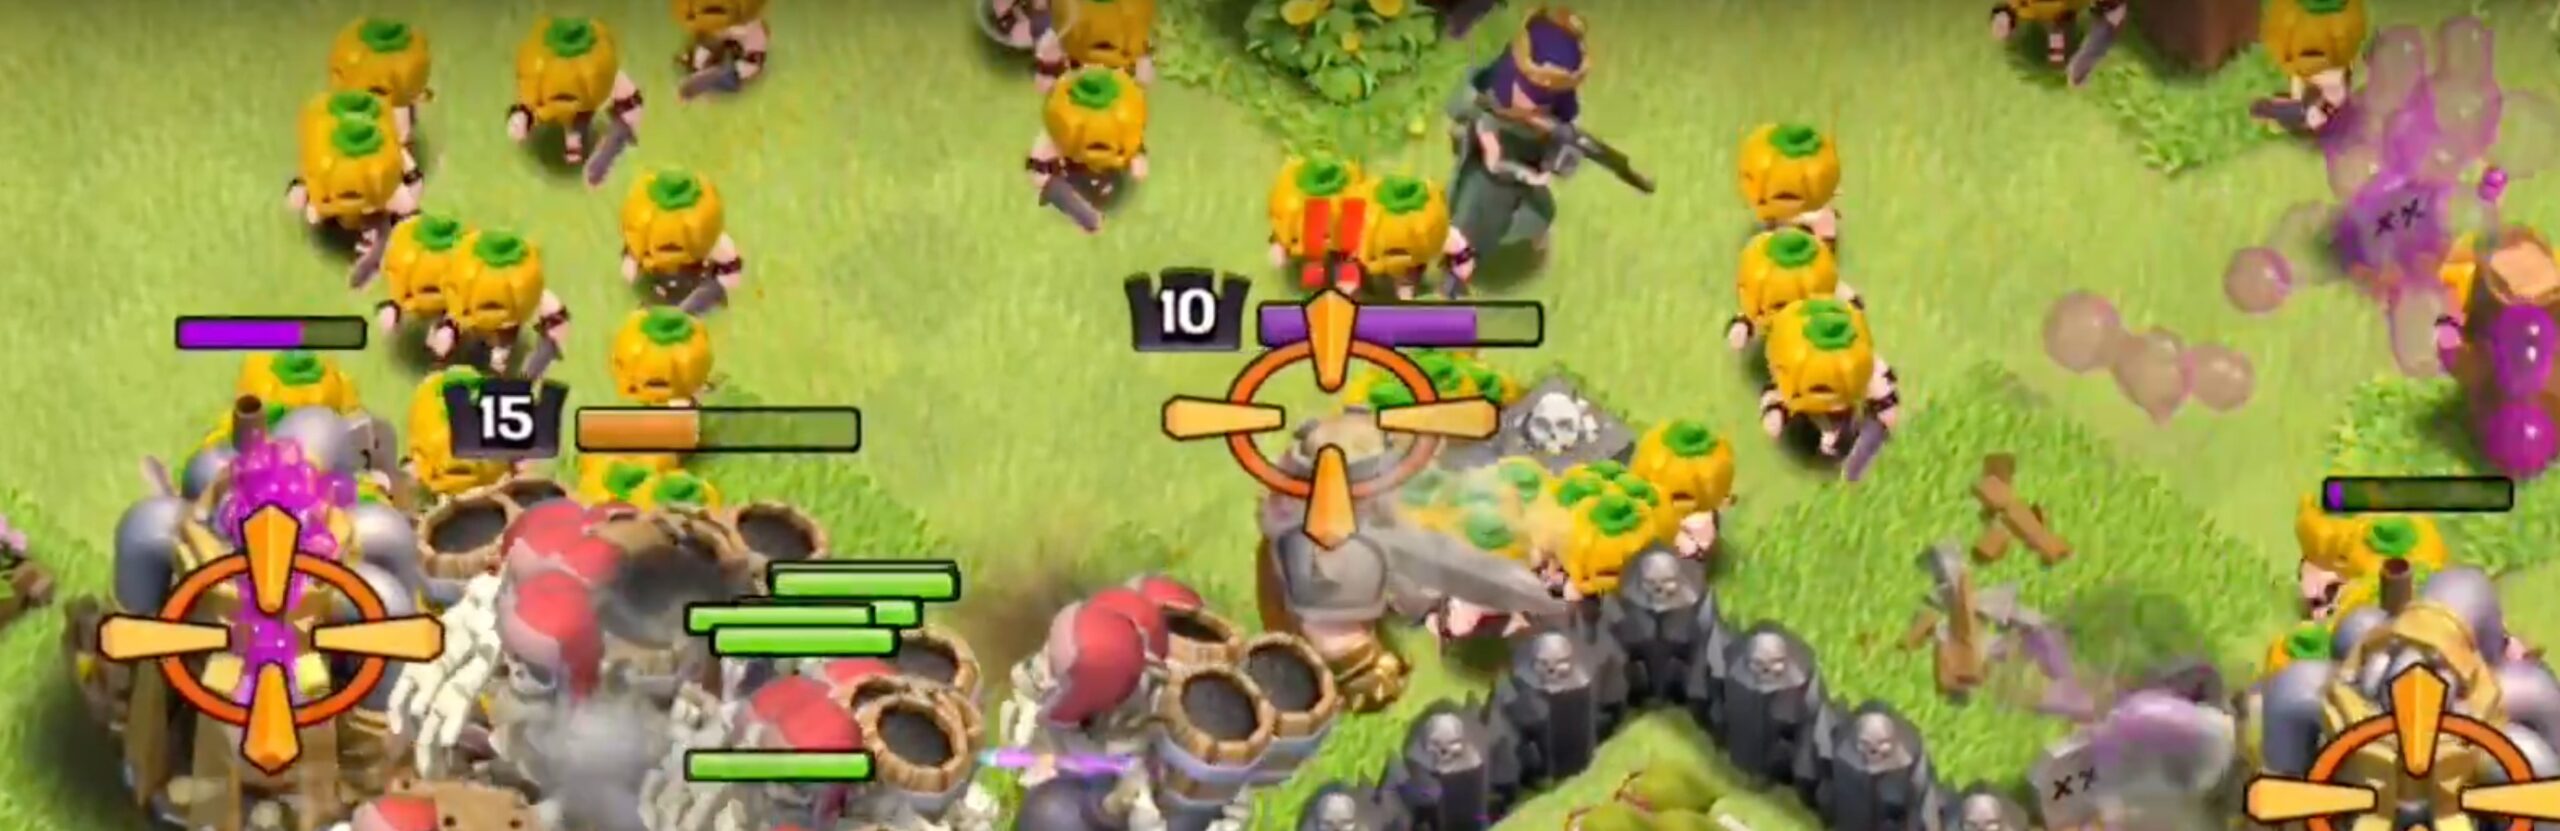 Clash Of Clans Fans - [Goal] All seven halloween decorations (and one  spikey cactus) all lined up | Facebook